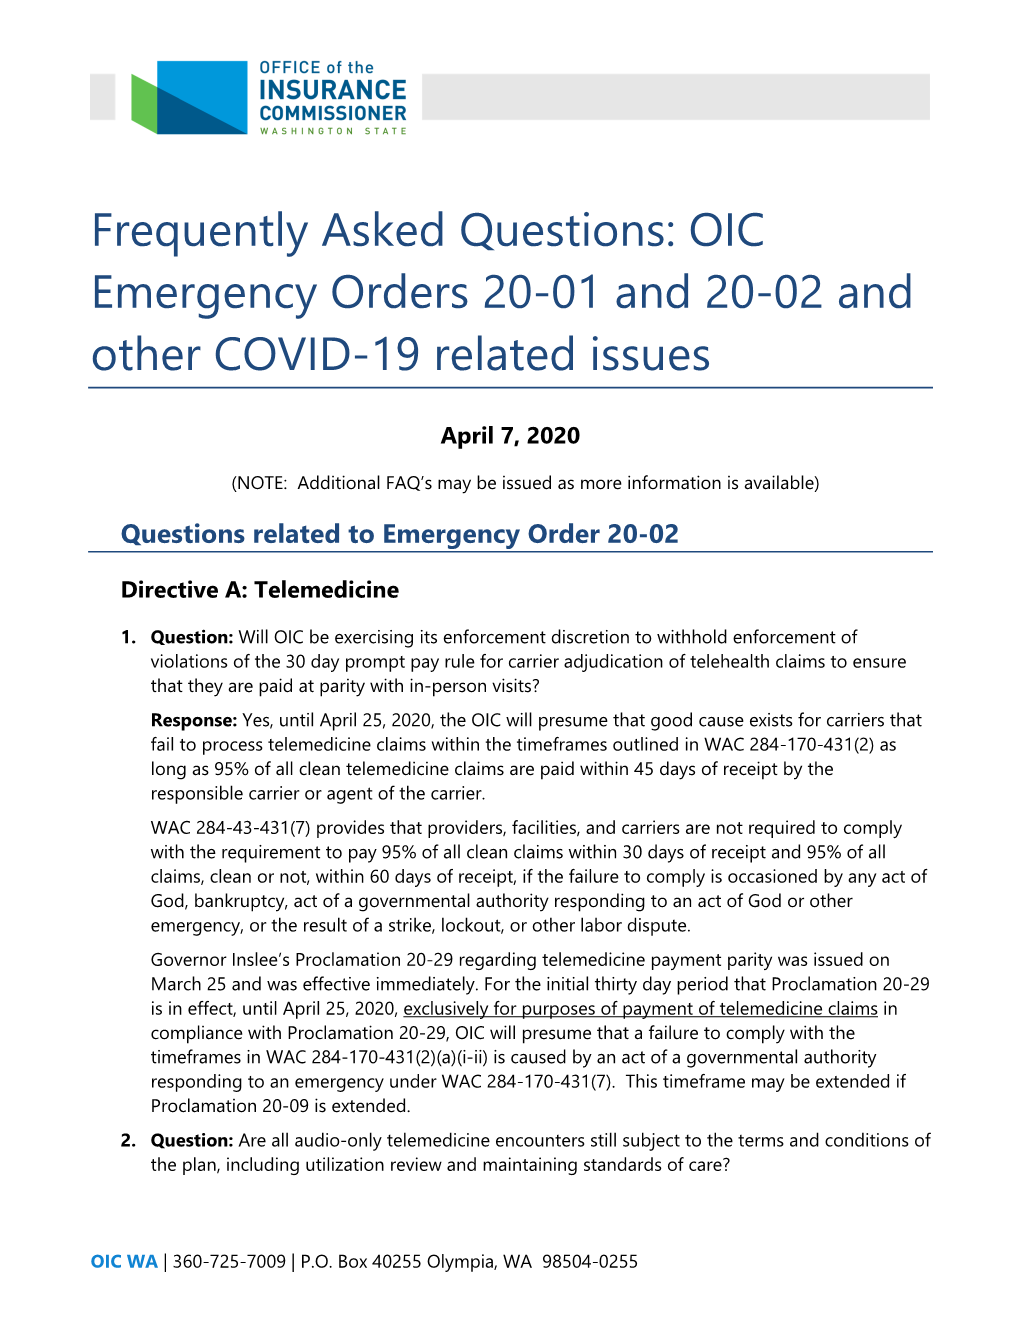 Frequently Asked Questions About Emergency Order 2020-1 and 2020-2